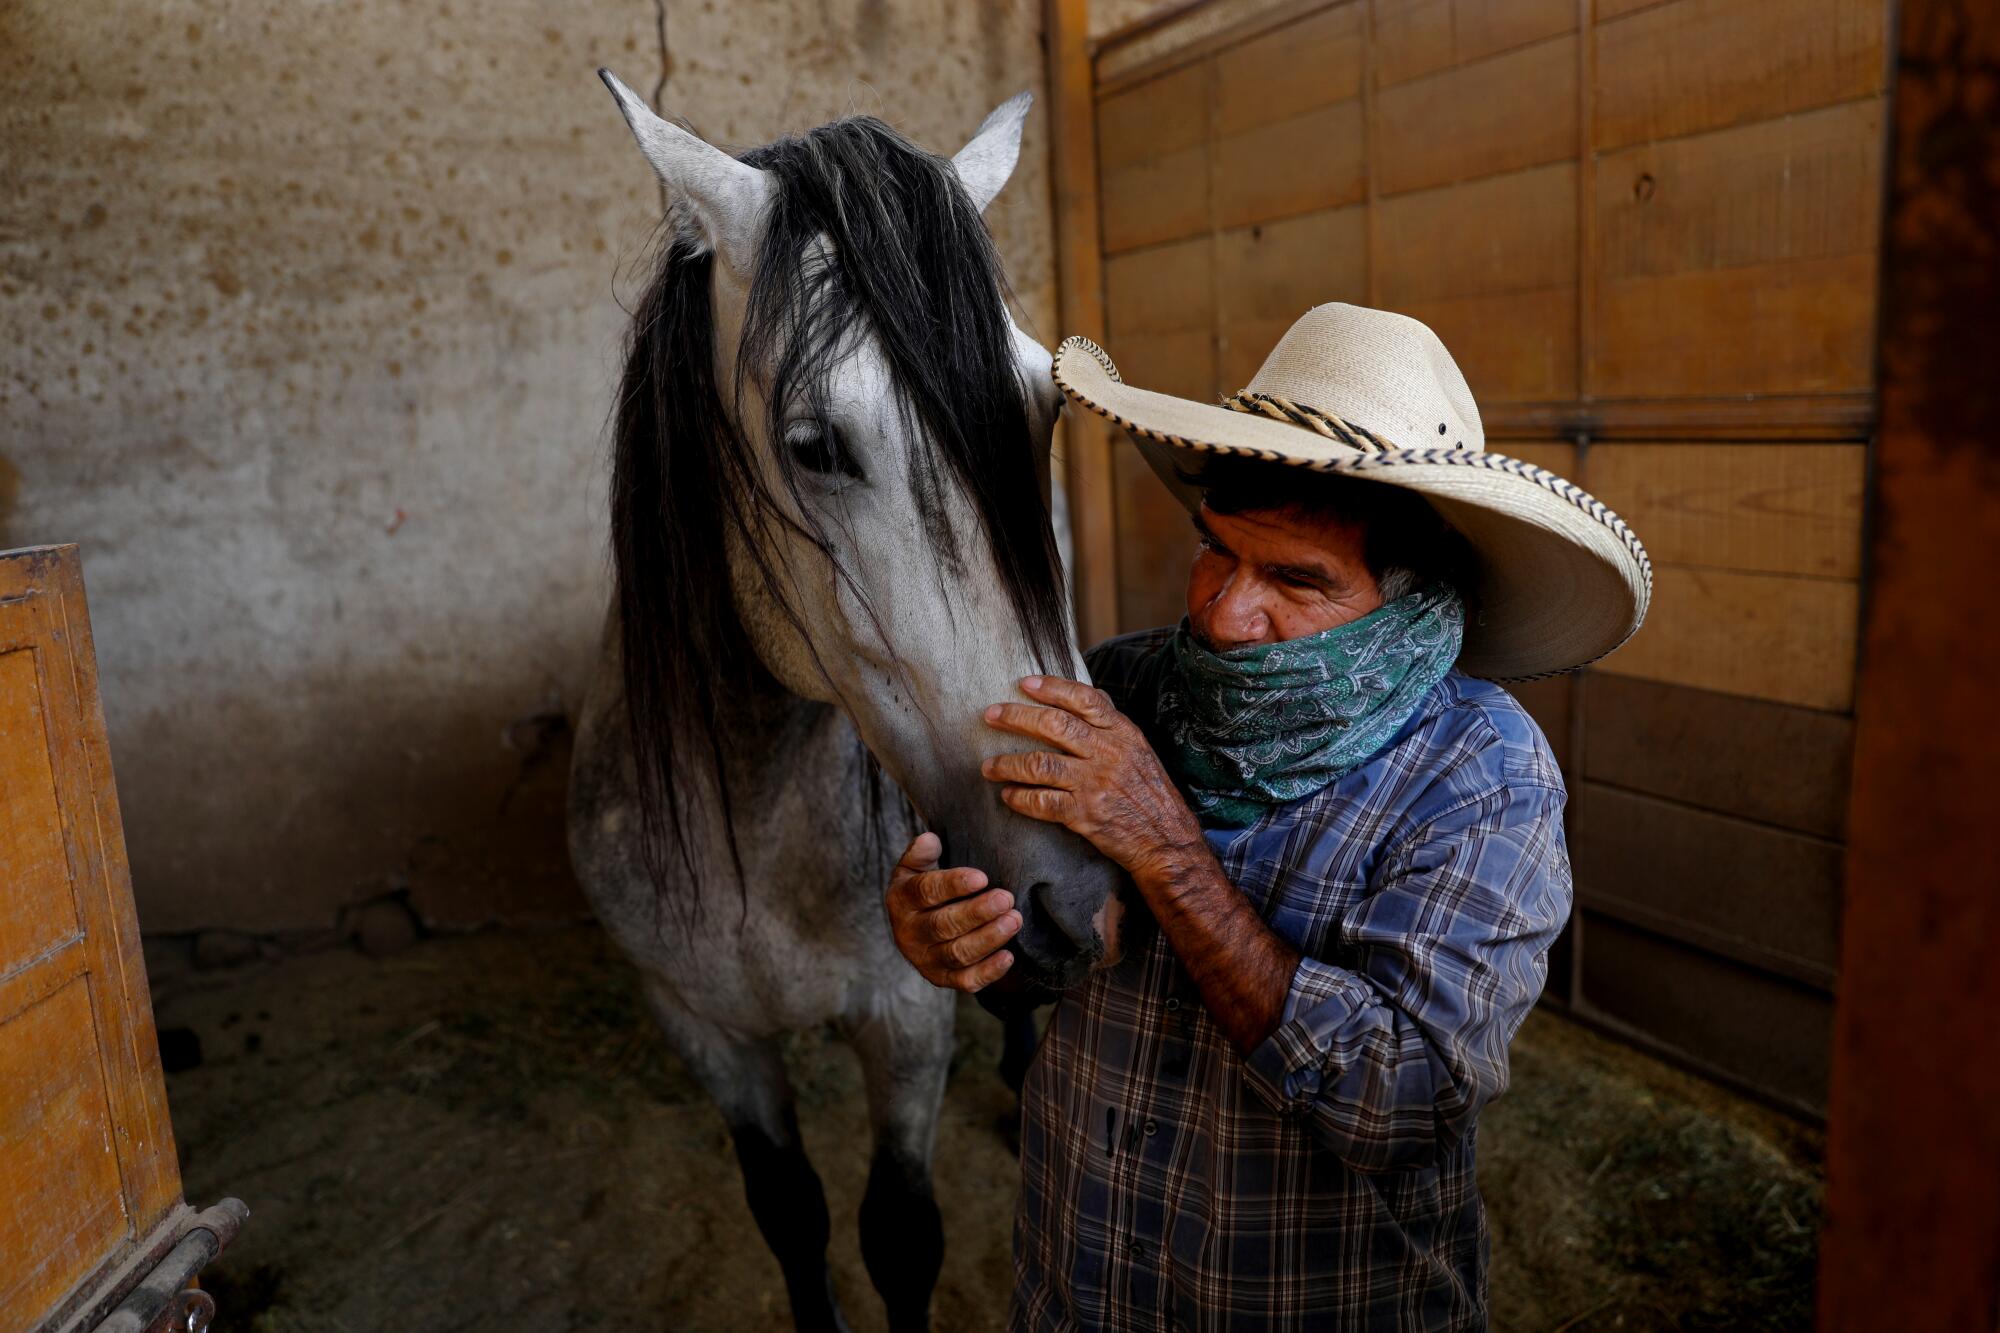 Rafael Gonzalez, wearing a charro hat and bandanna, rubs a horse's muzzle in a stall. 